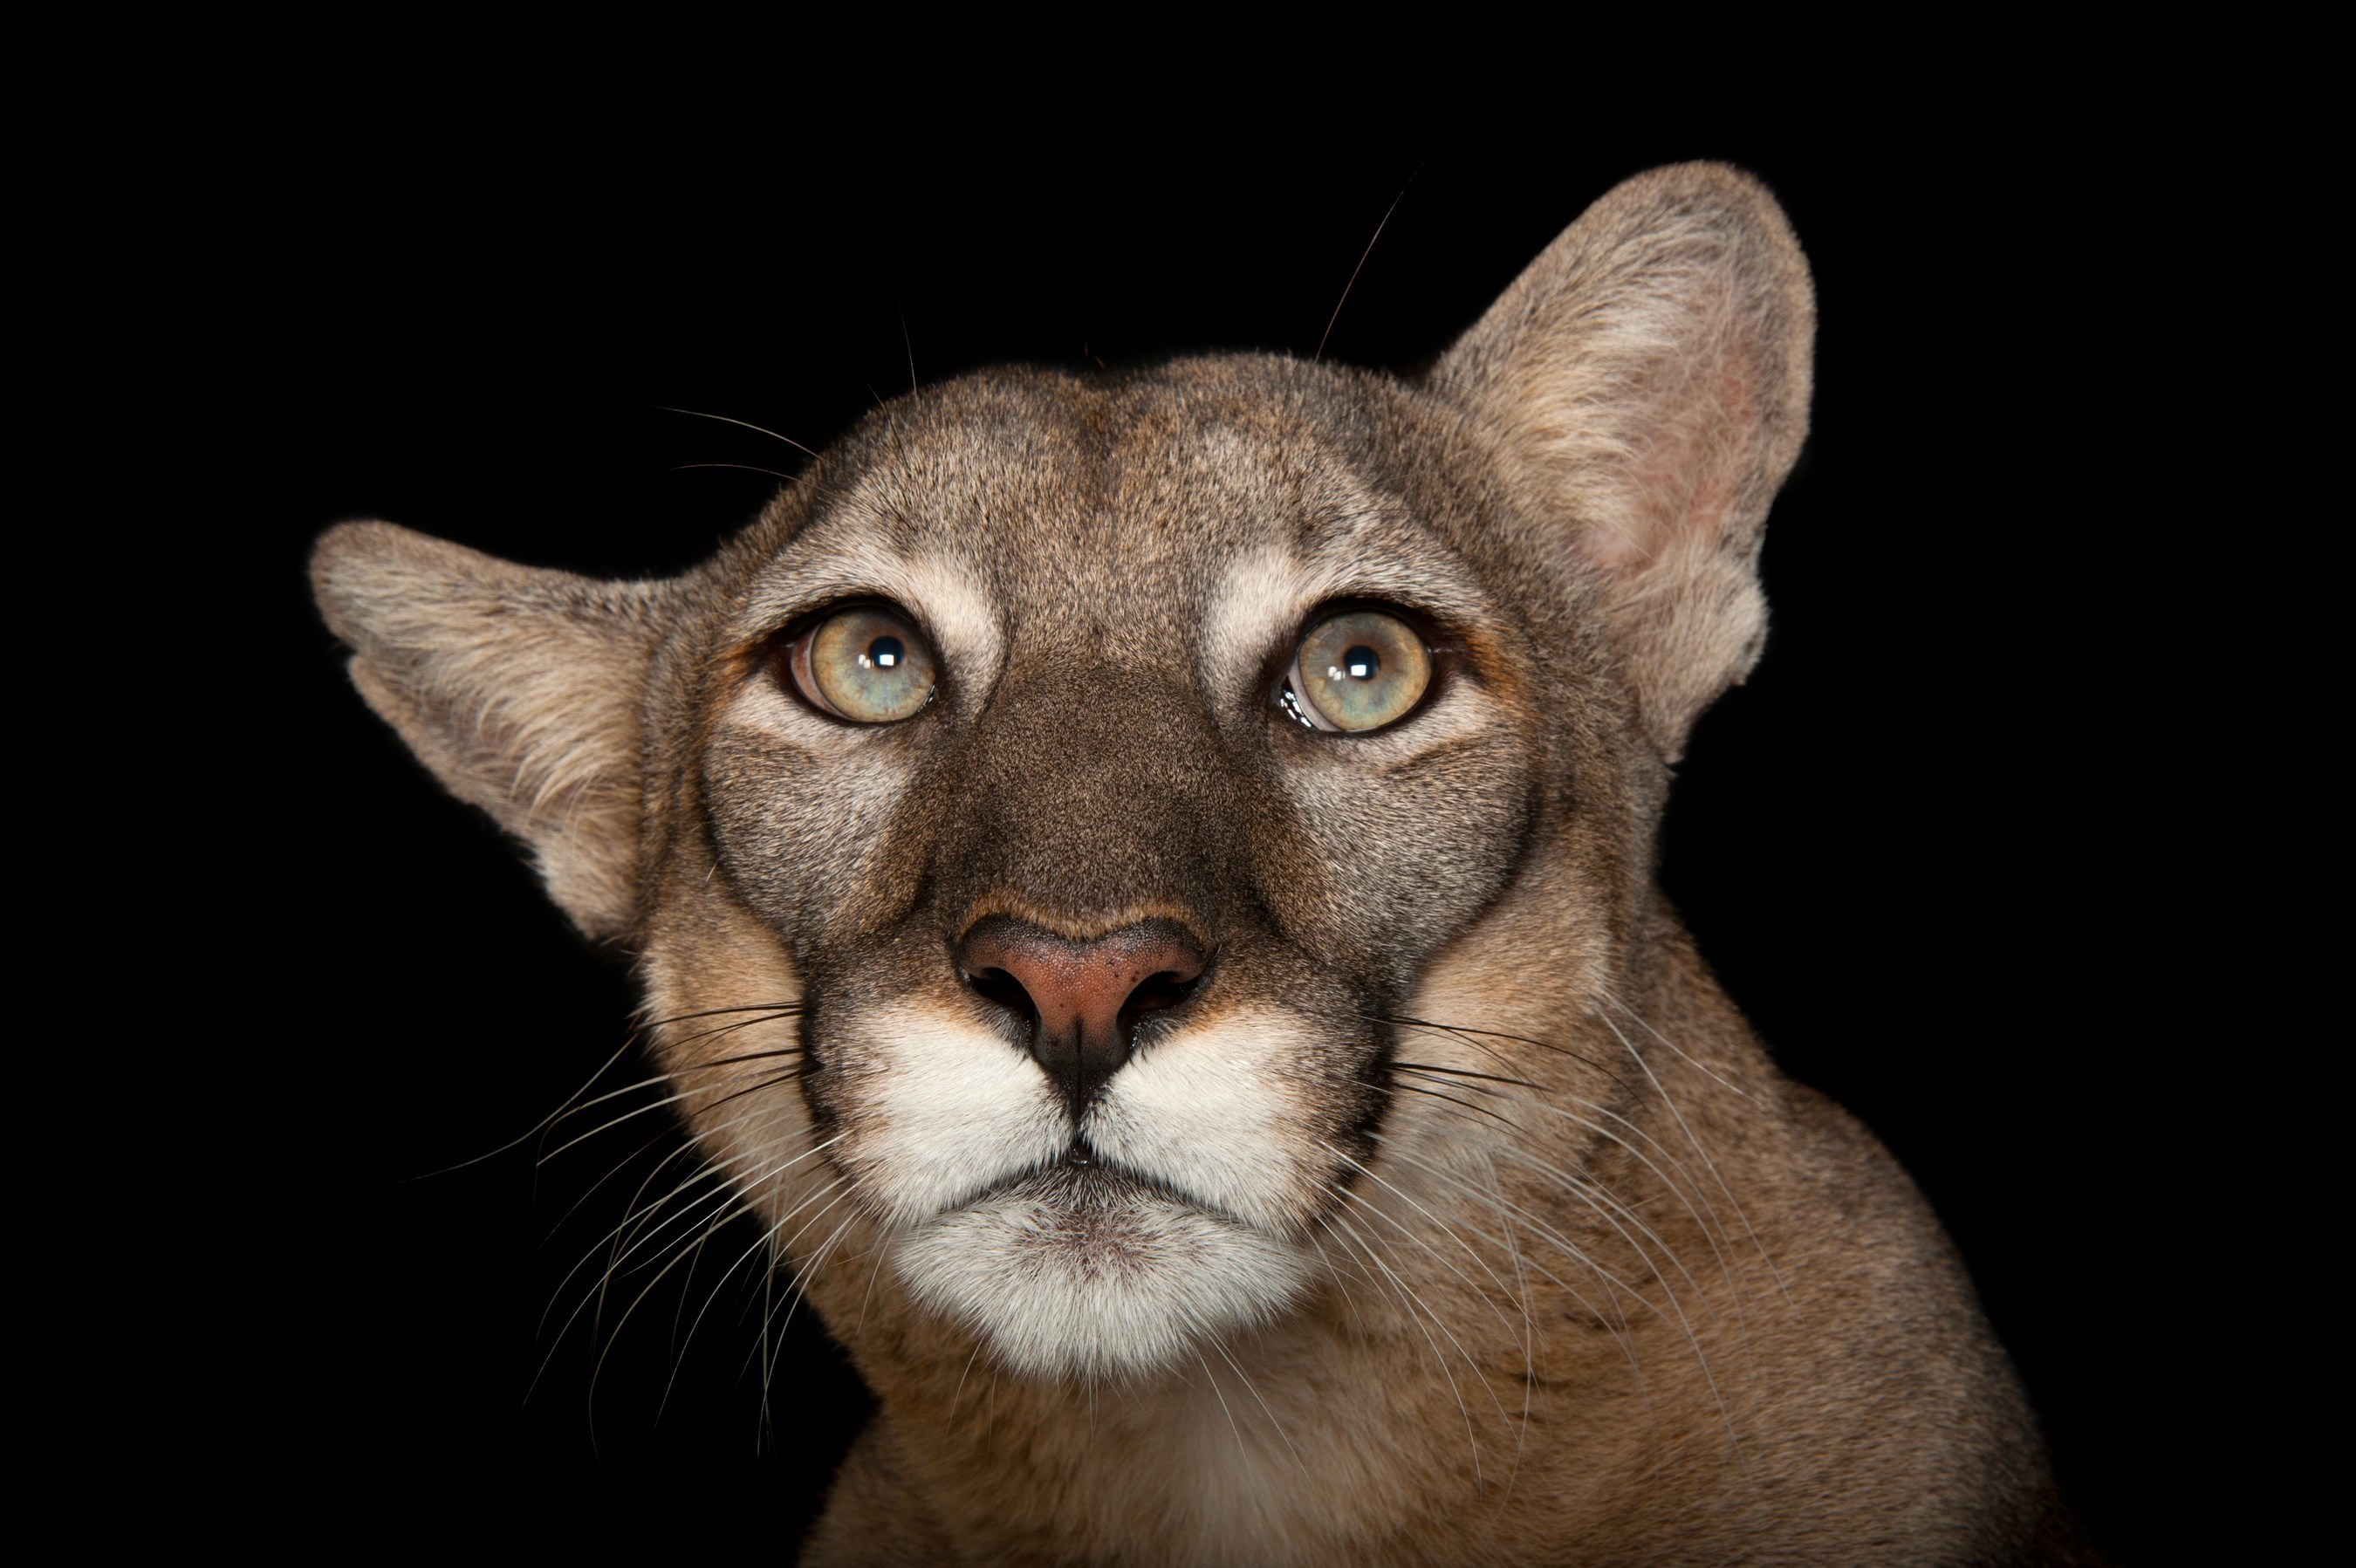 A Florida panther (Puma concolor coryi) named Lucy at Tampa's Lowry Park Zoo. Credit: Joel Sartore/National Geographic Photo Ark